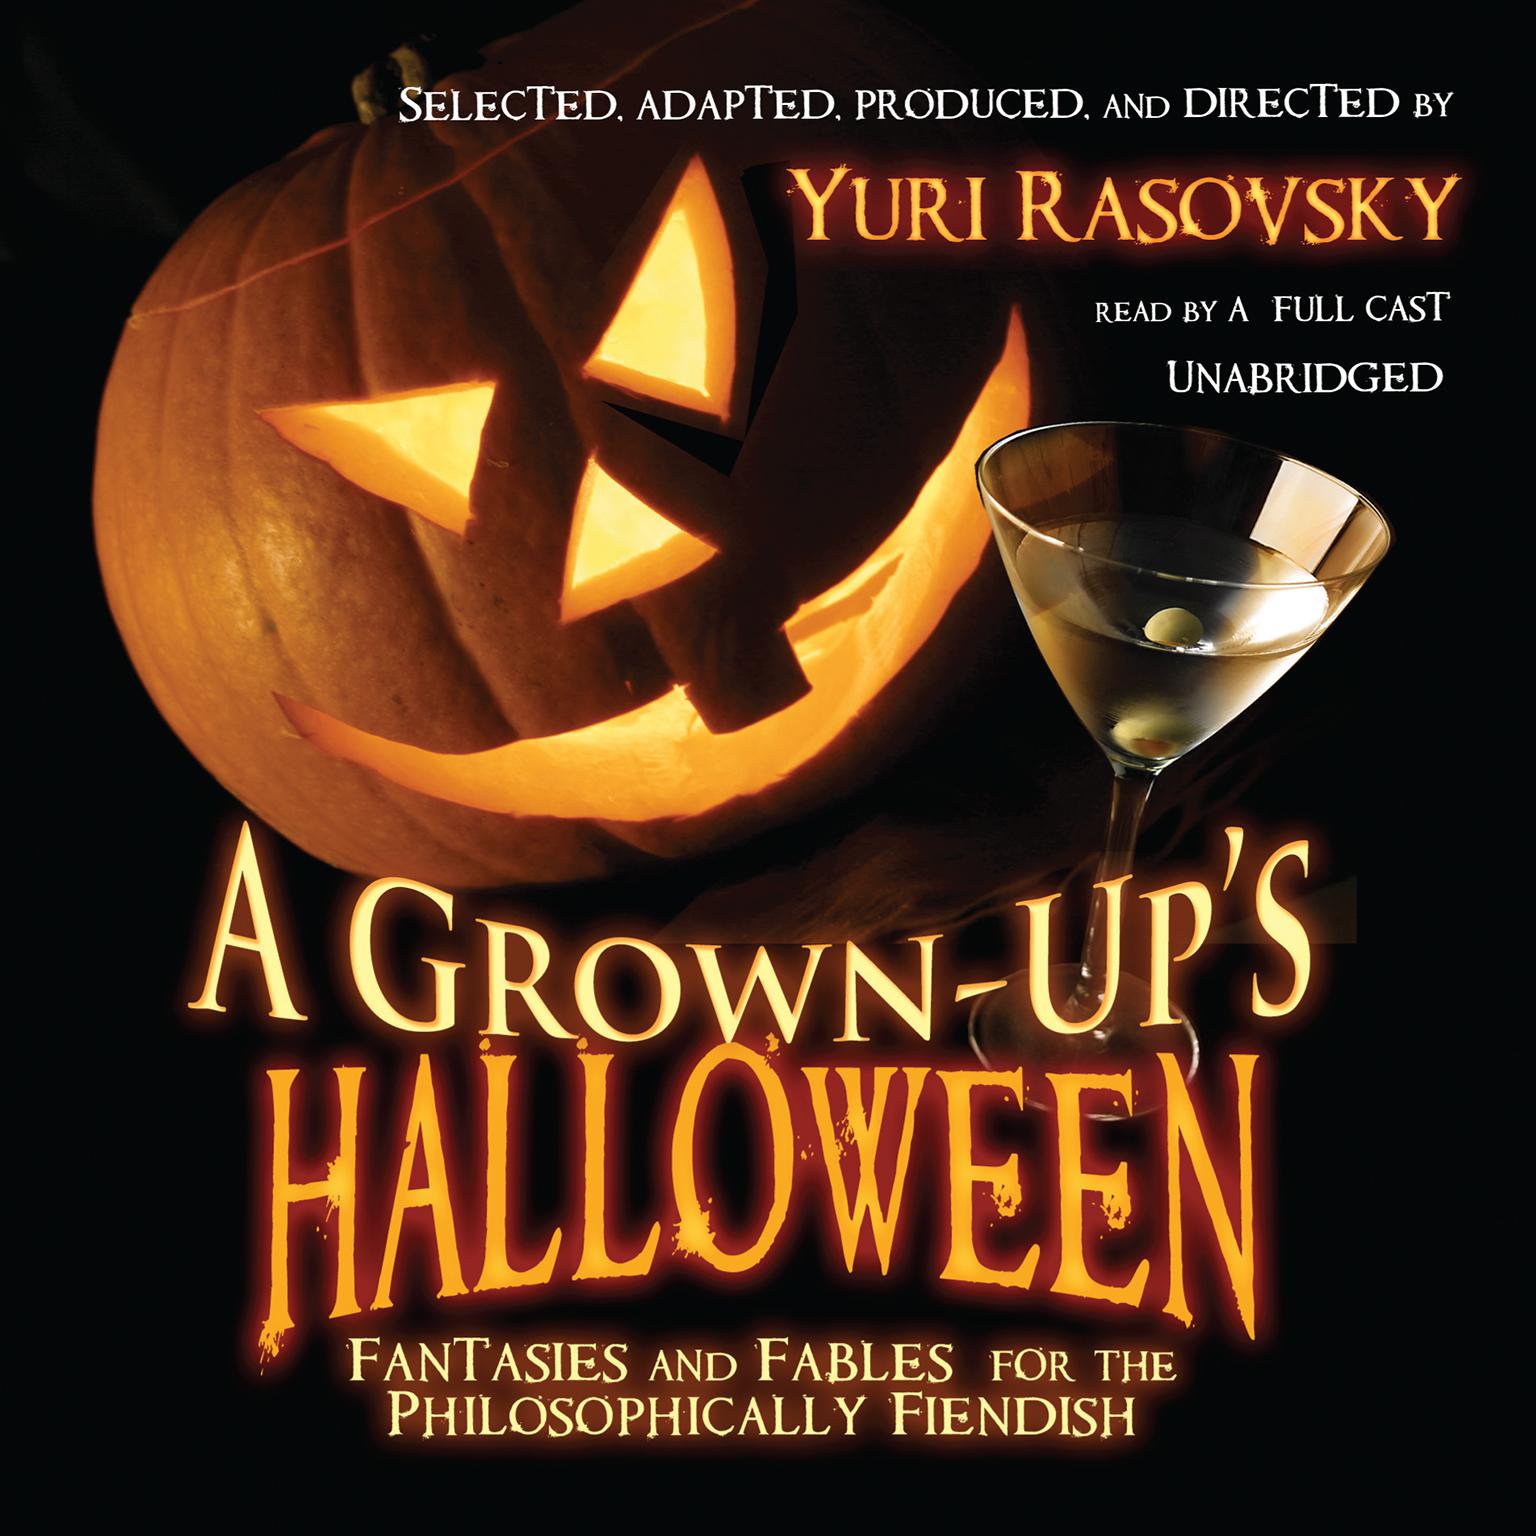 A Grown-Up’s Halloween: Fantasies and Fables for the Philosophically Fiendish Audiobook, by various authors